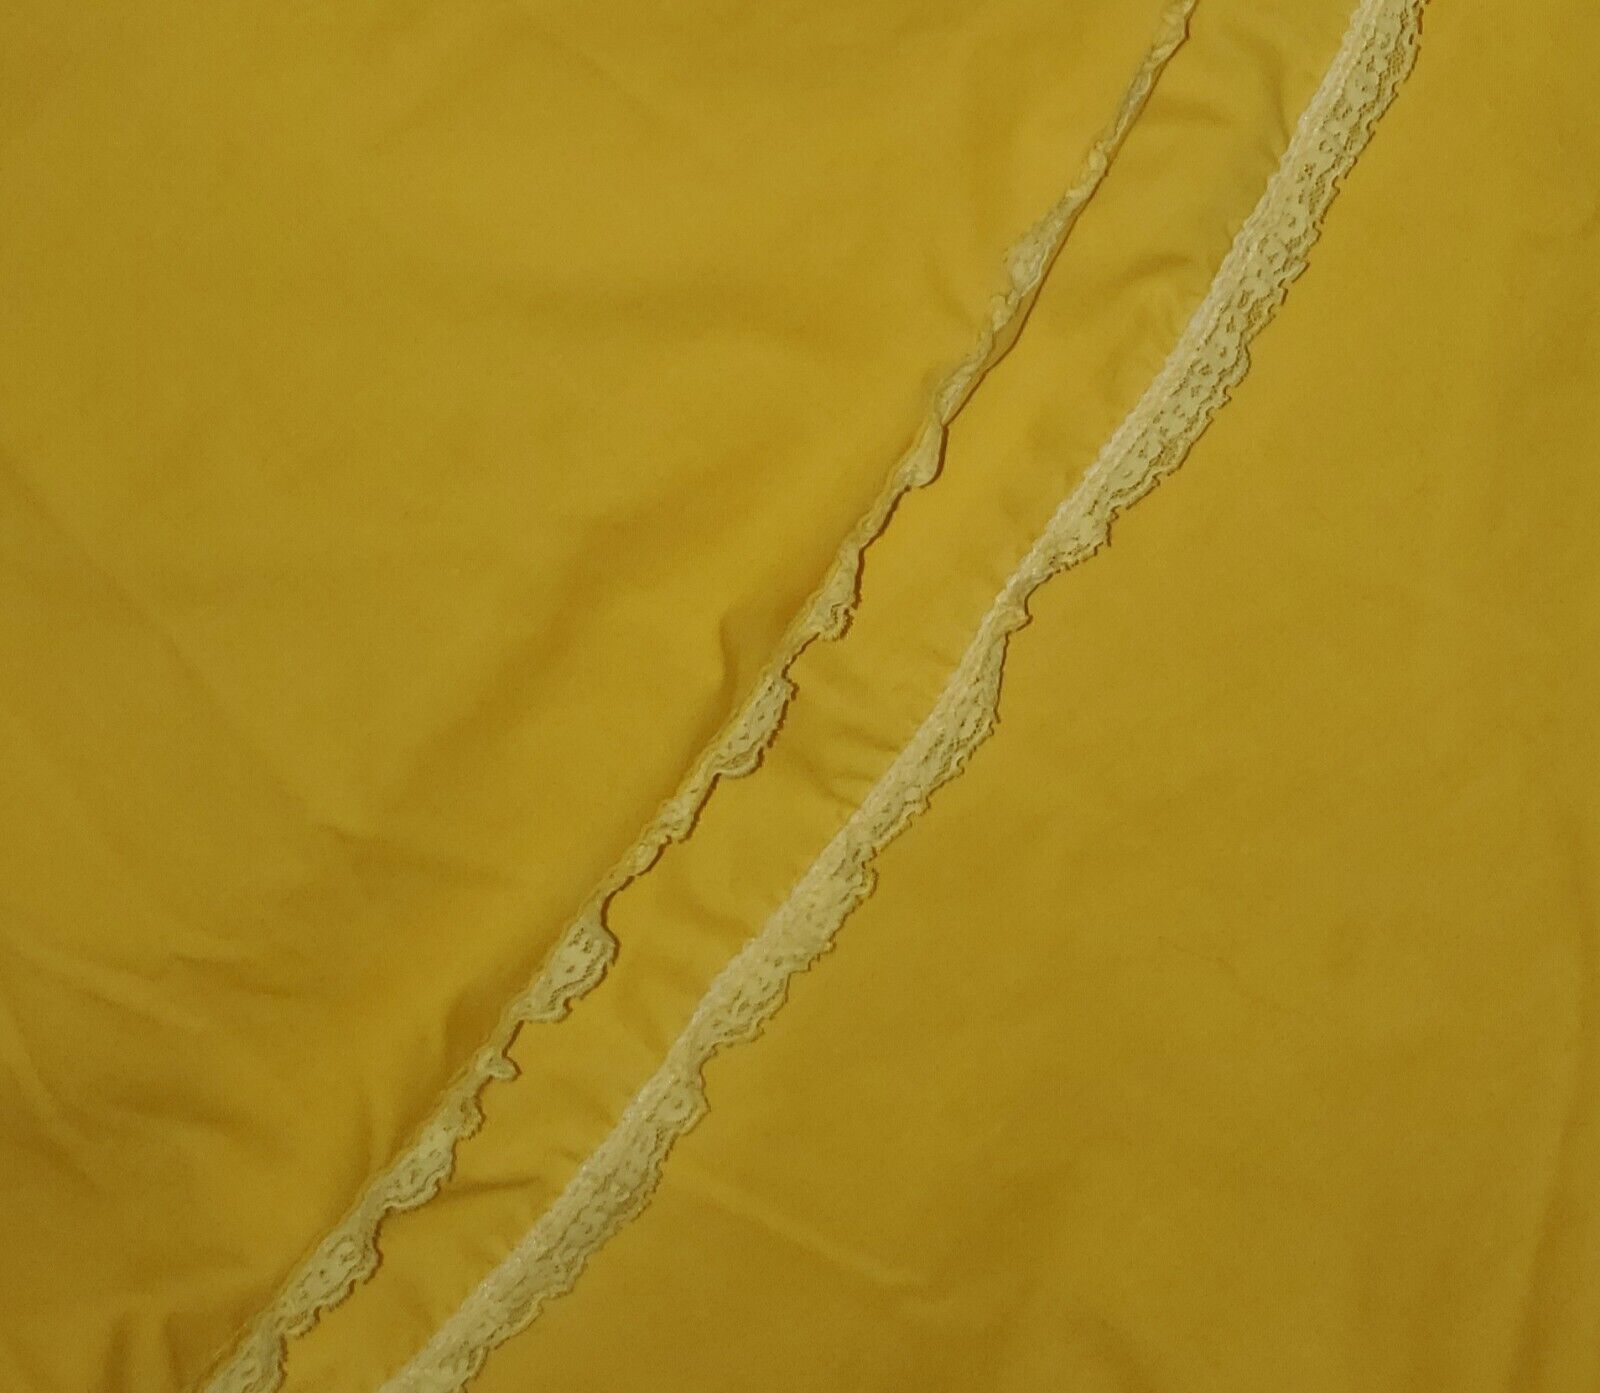 Vintage 1970s Round Mod Yellow Tablecloth Lace Trim 78